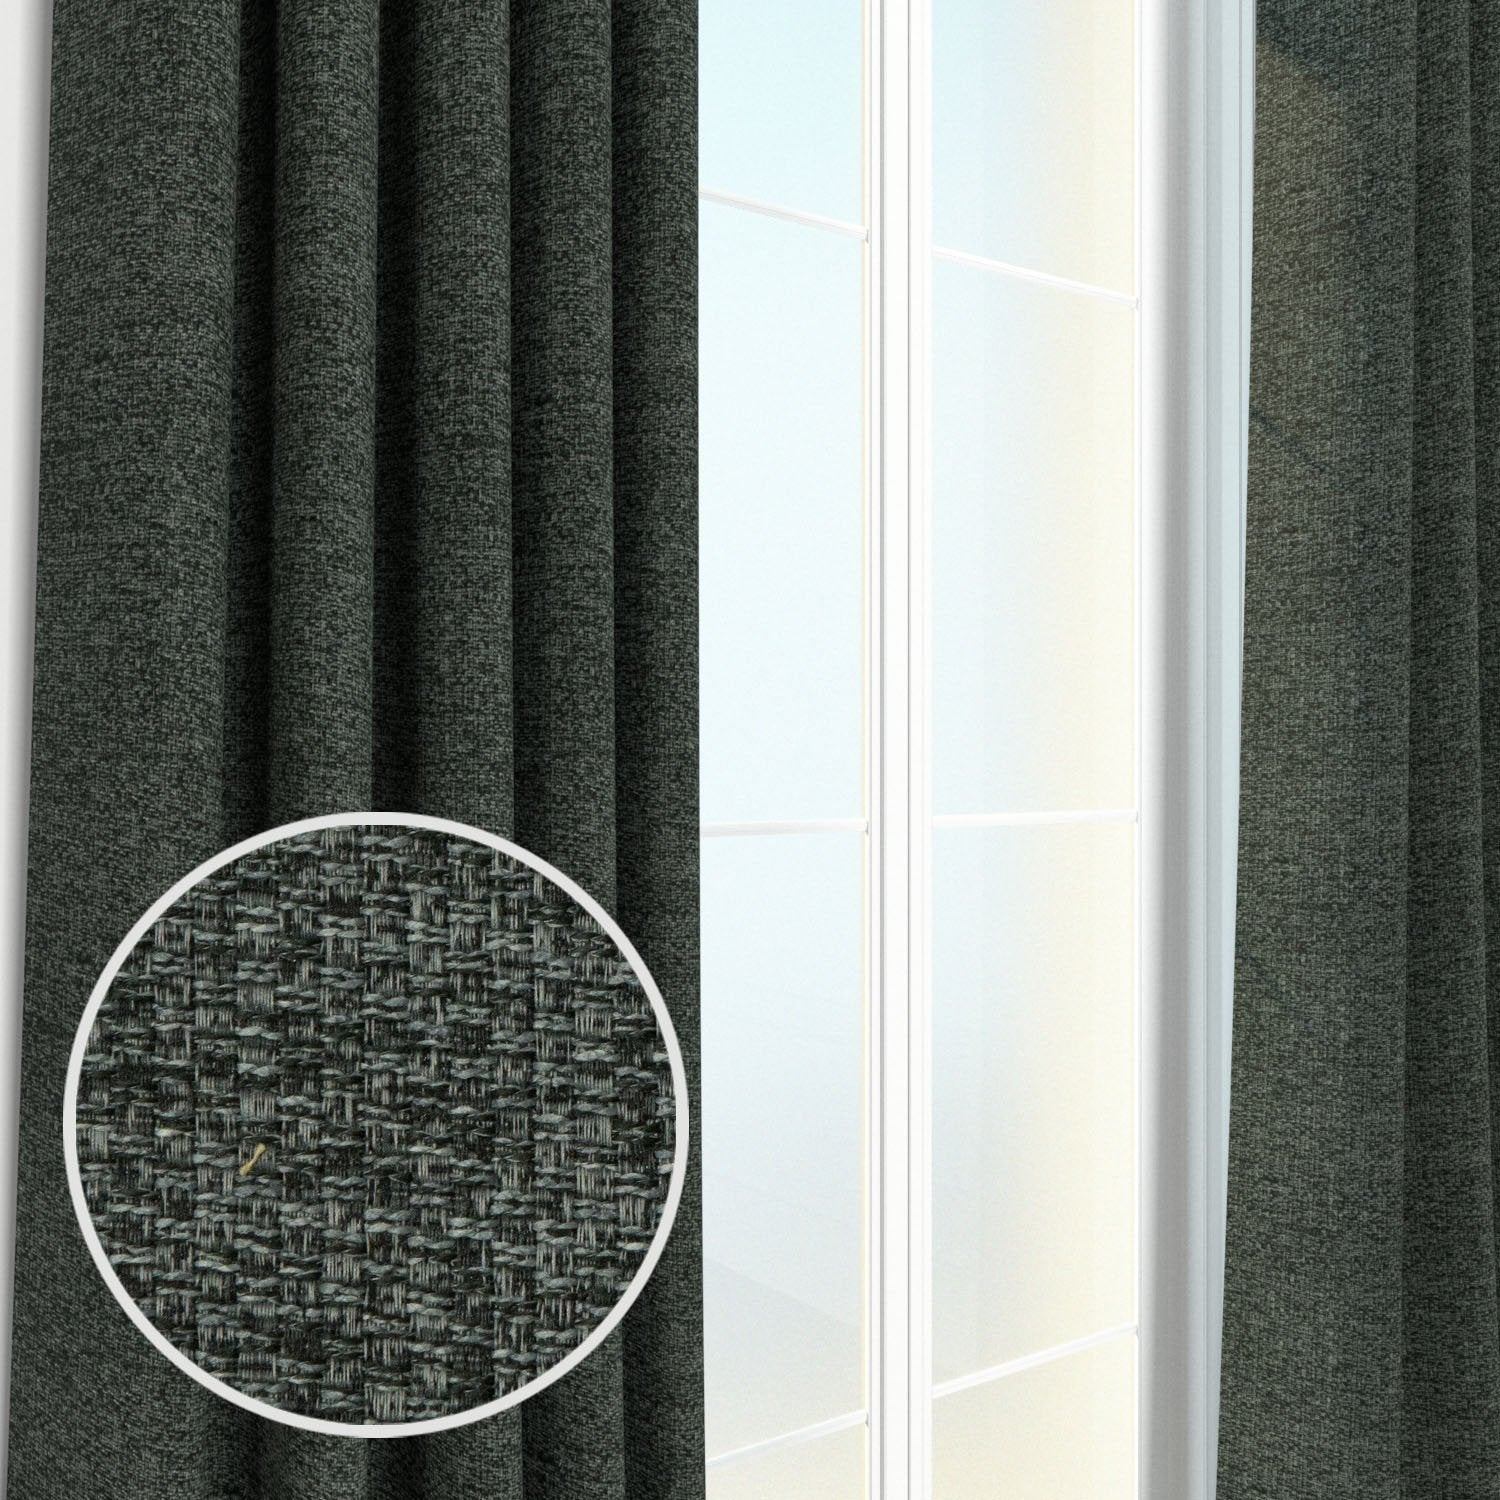 Pair Webster Woven Tweed Burlap Textured Curtain Panels with FREE Curtain Rod